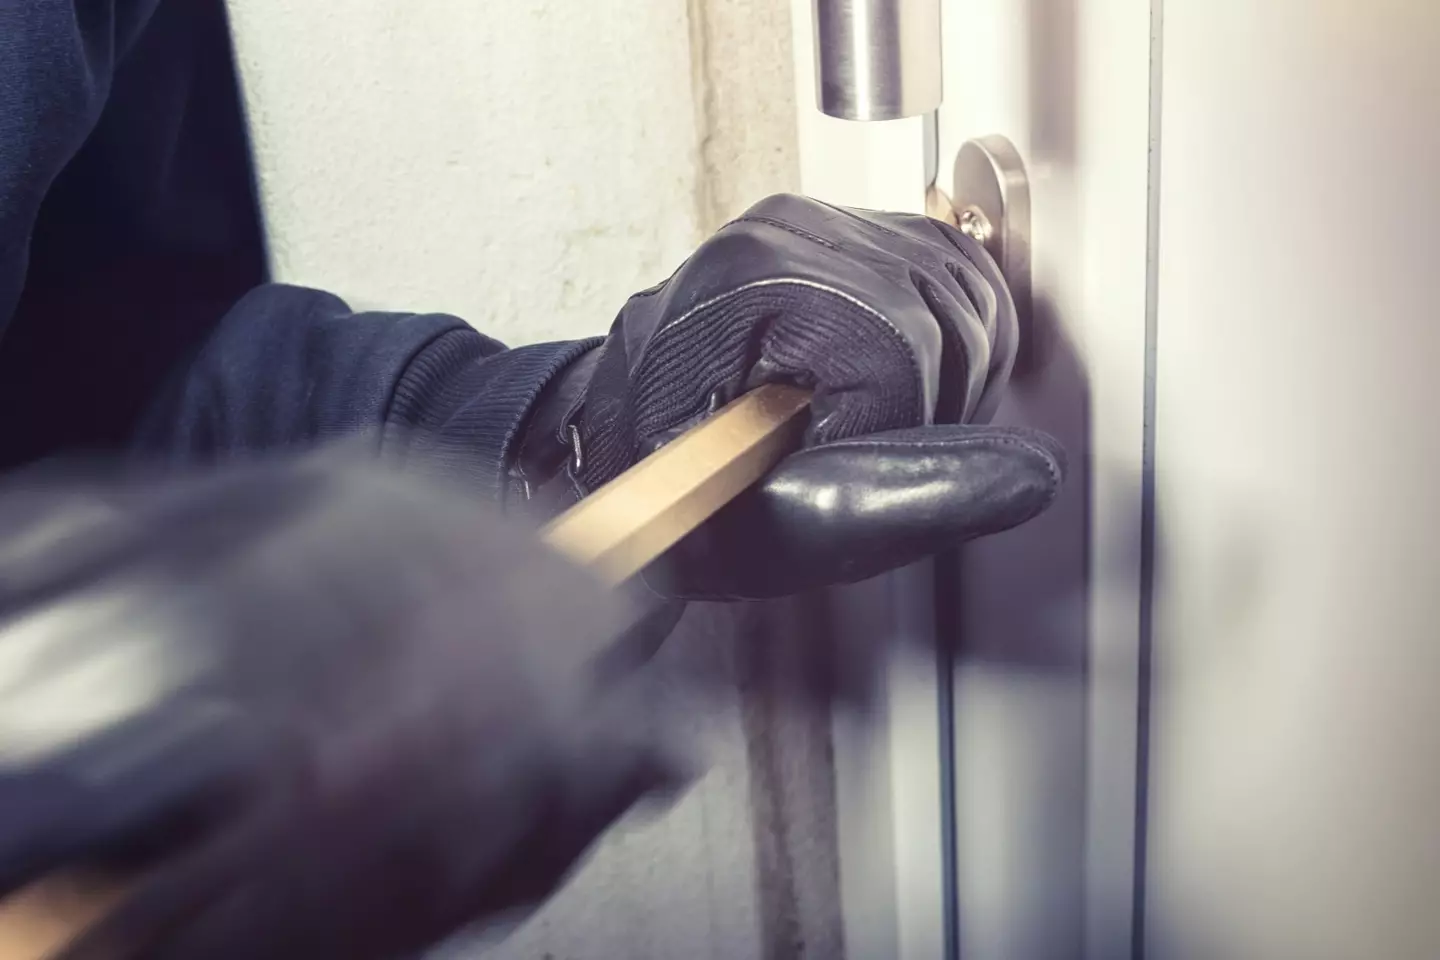 Don't leave tools lying around for burglars to take advantage of.